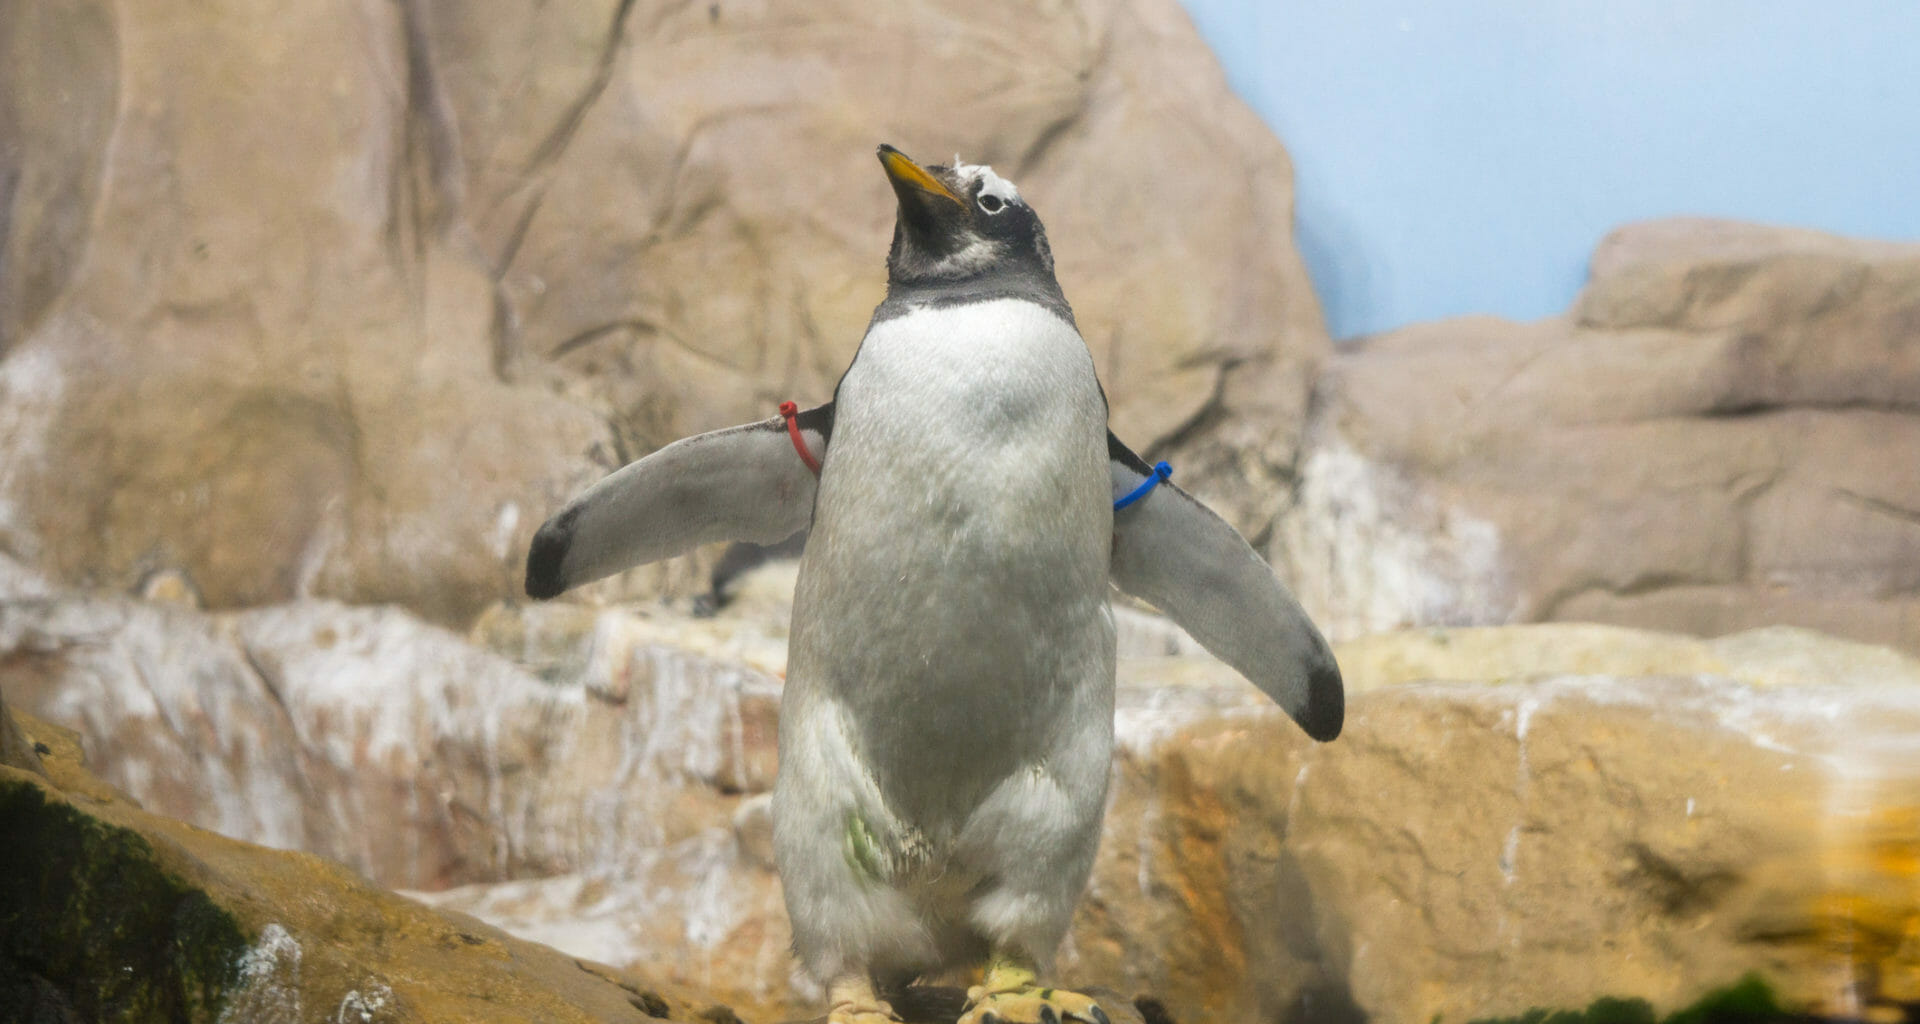 Claim Edinburgh Zoo employs penguin erector after planes fly over is FFS 3